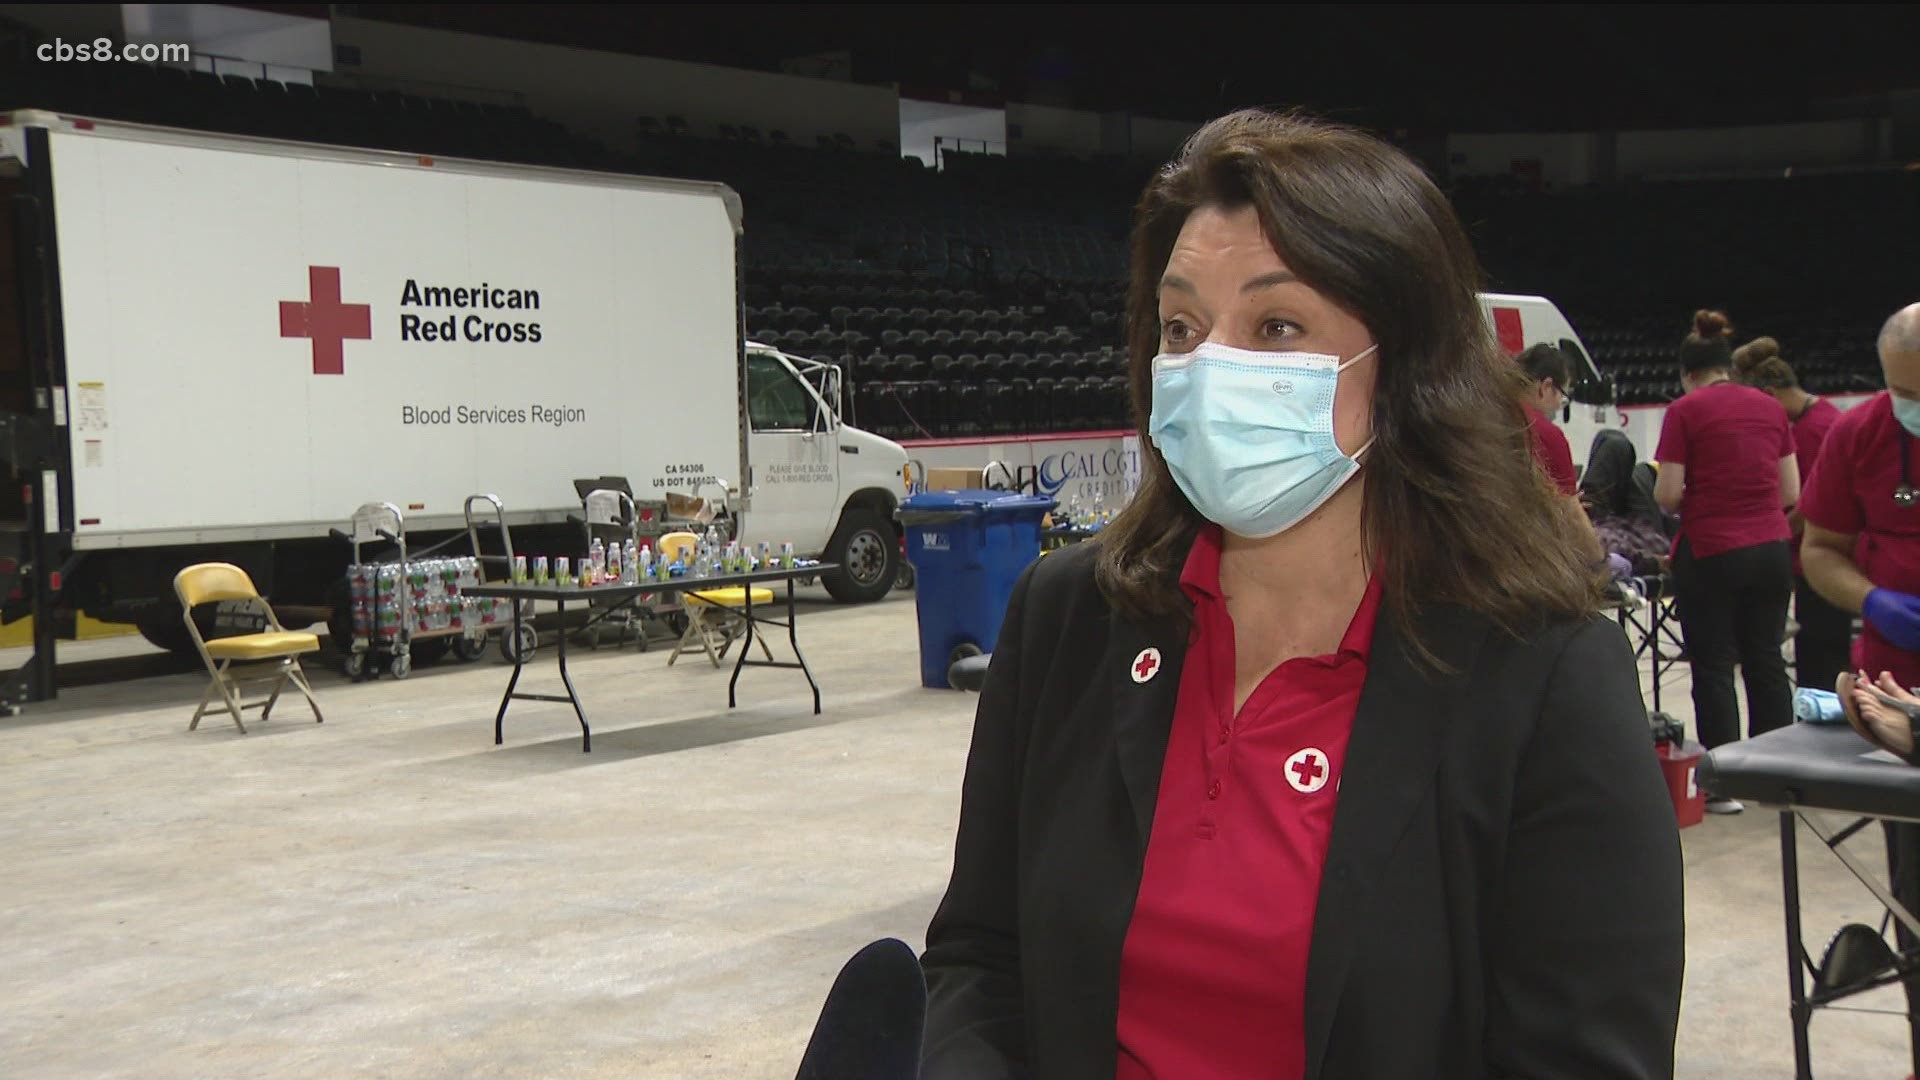 More than 170 people have donated blood on Tuesday at the Pechanga Arena.